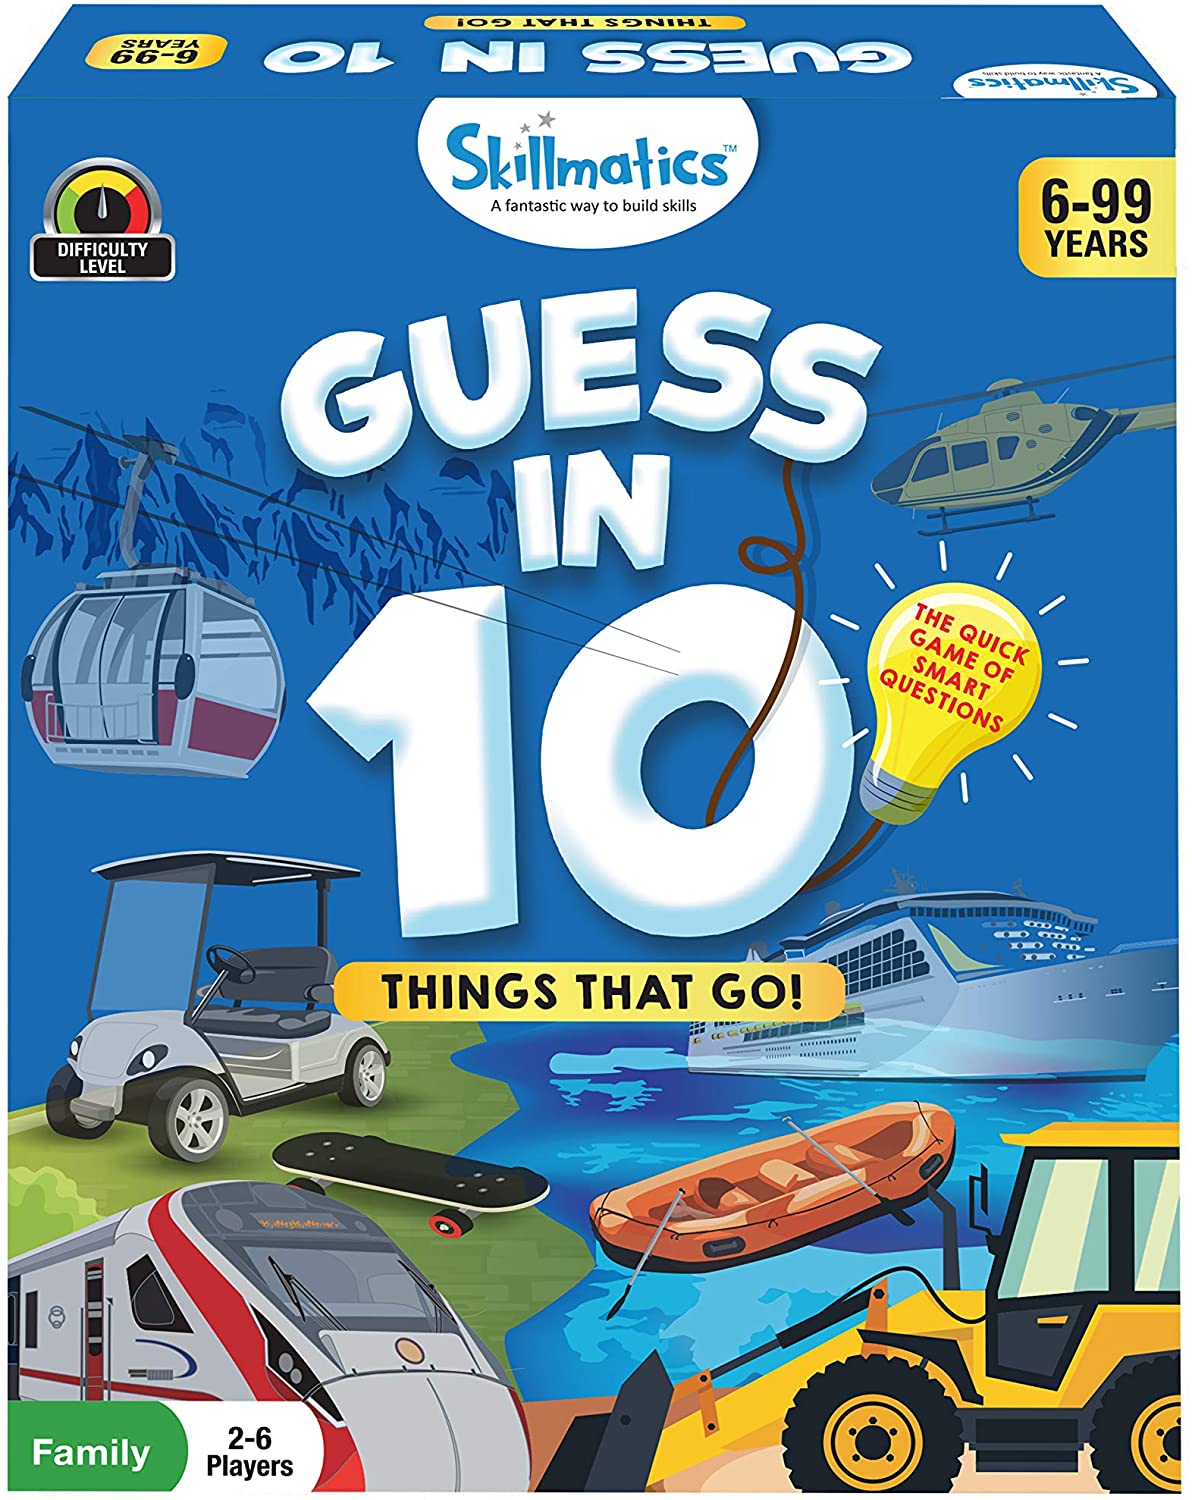 Skillmatics Guess in 10 Things That Go! - Card Game of Smart Questions for  Kids & Families, Super Fun & General Knowledge for Family Game Night